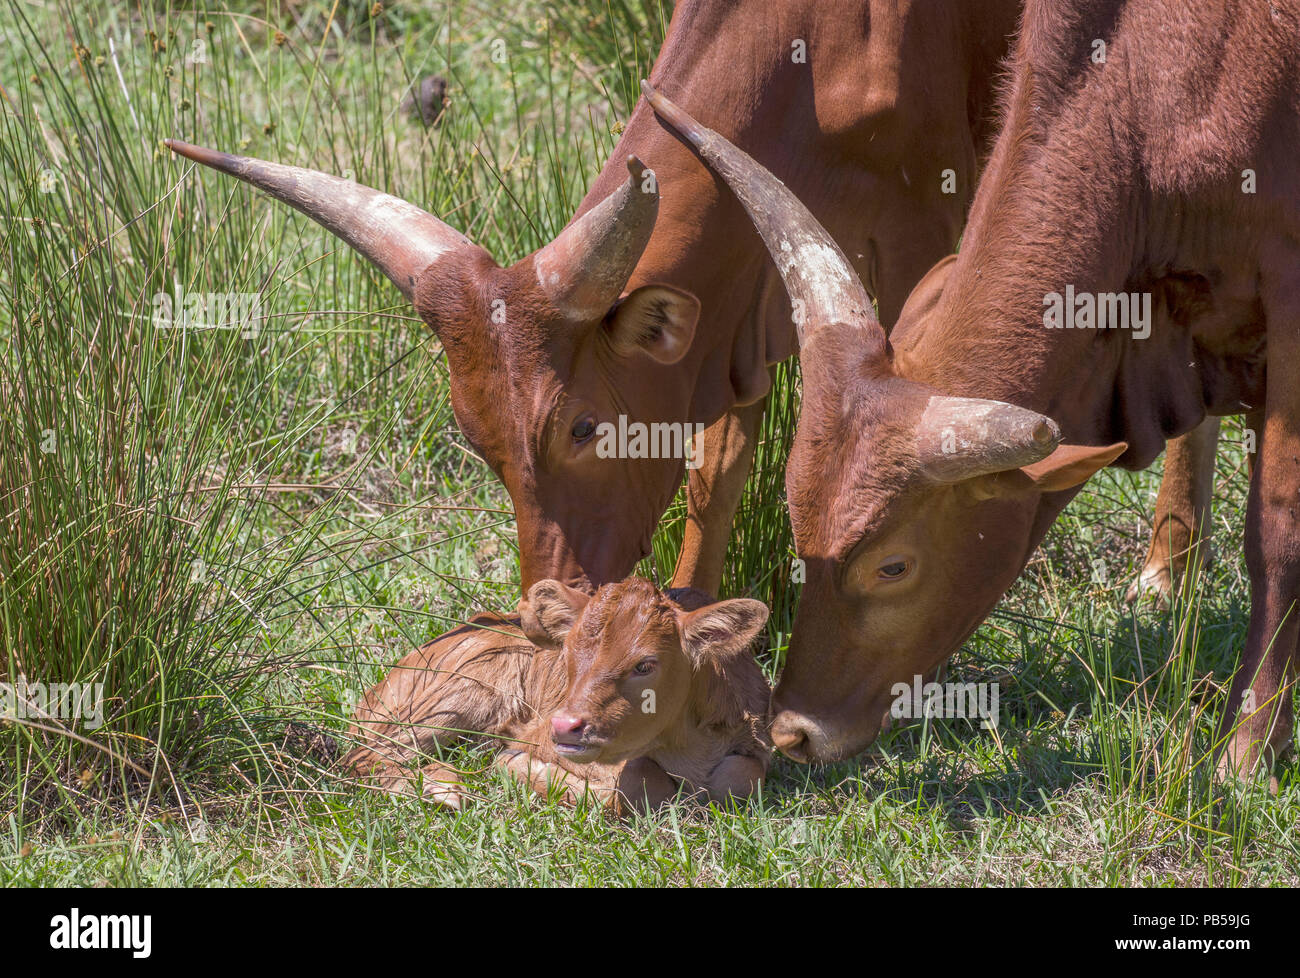 Two Watusi cattle showing affection for young calf Stock Photo